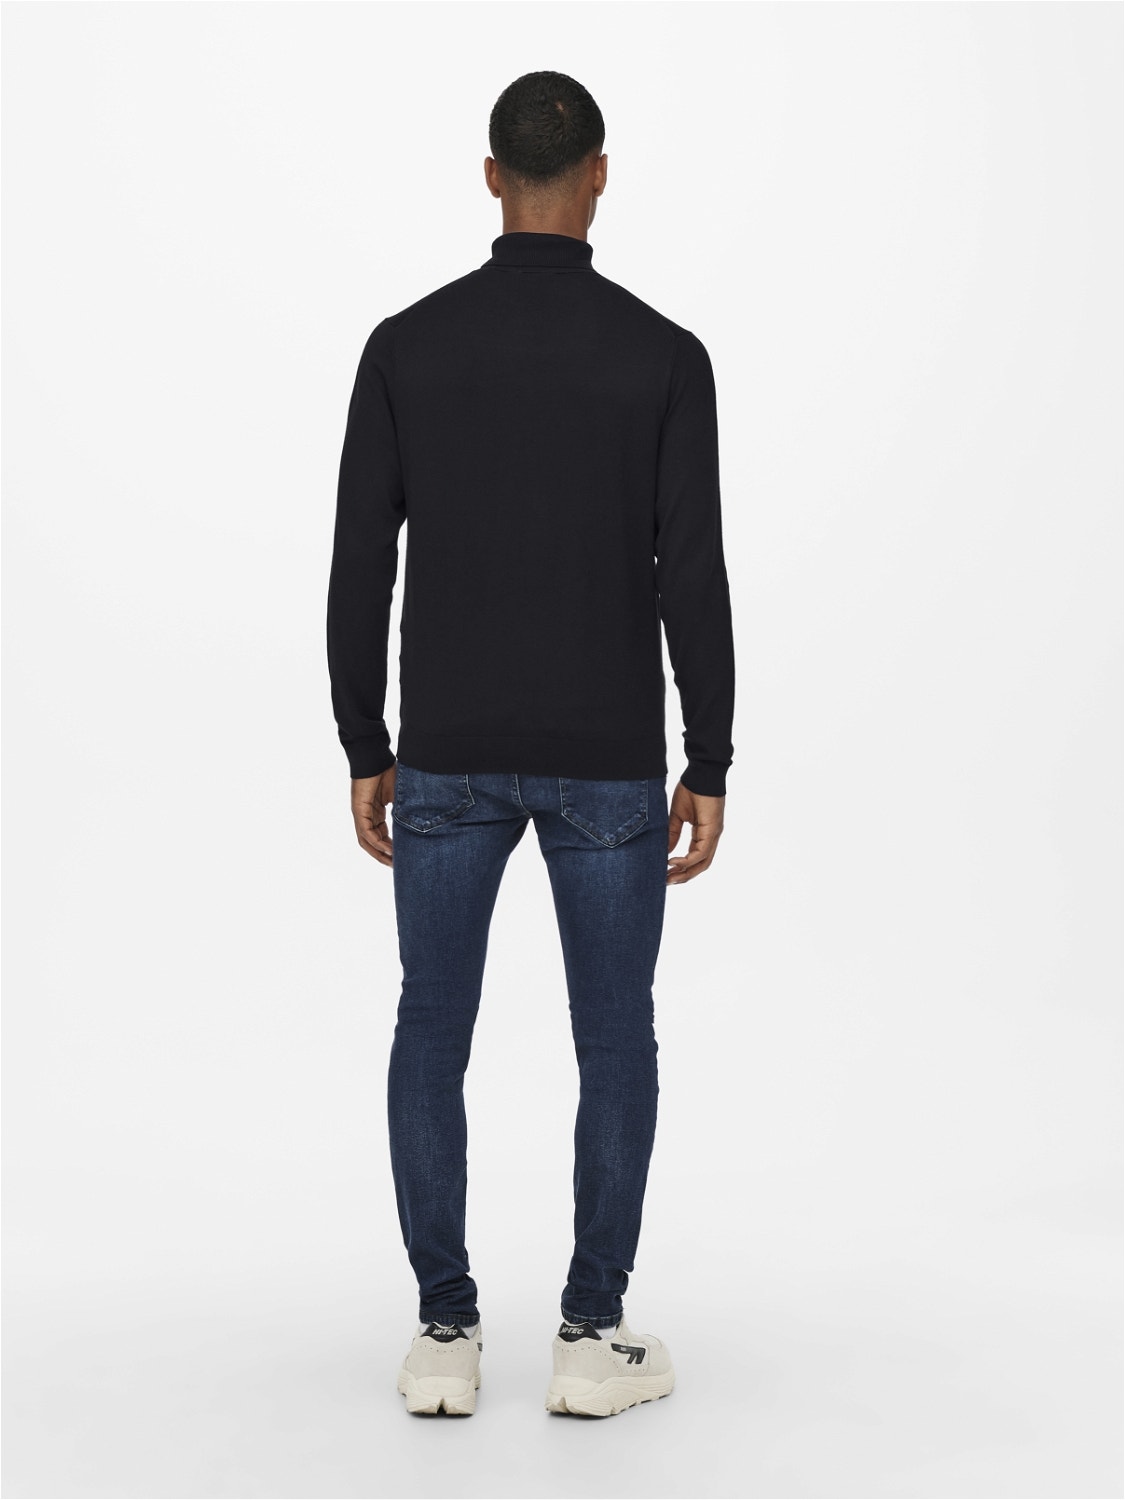 ONLY & SONS Normal passform Polokrage Pullover -Black - 22020879